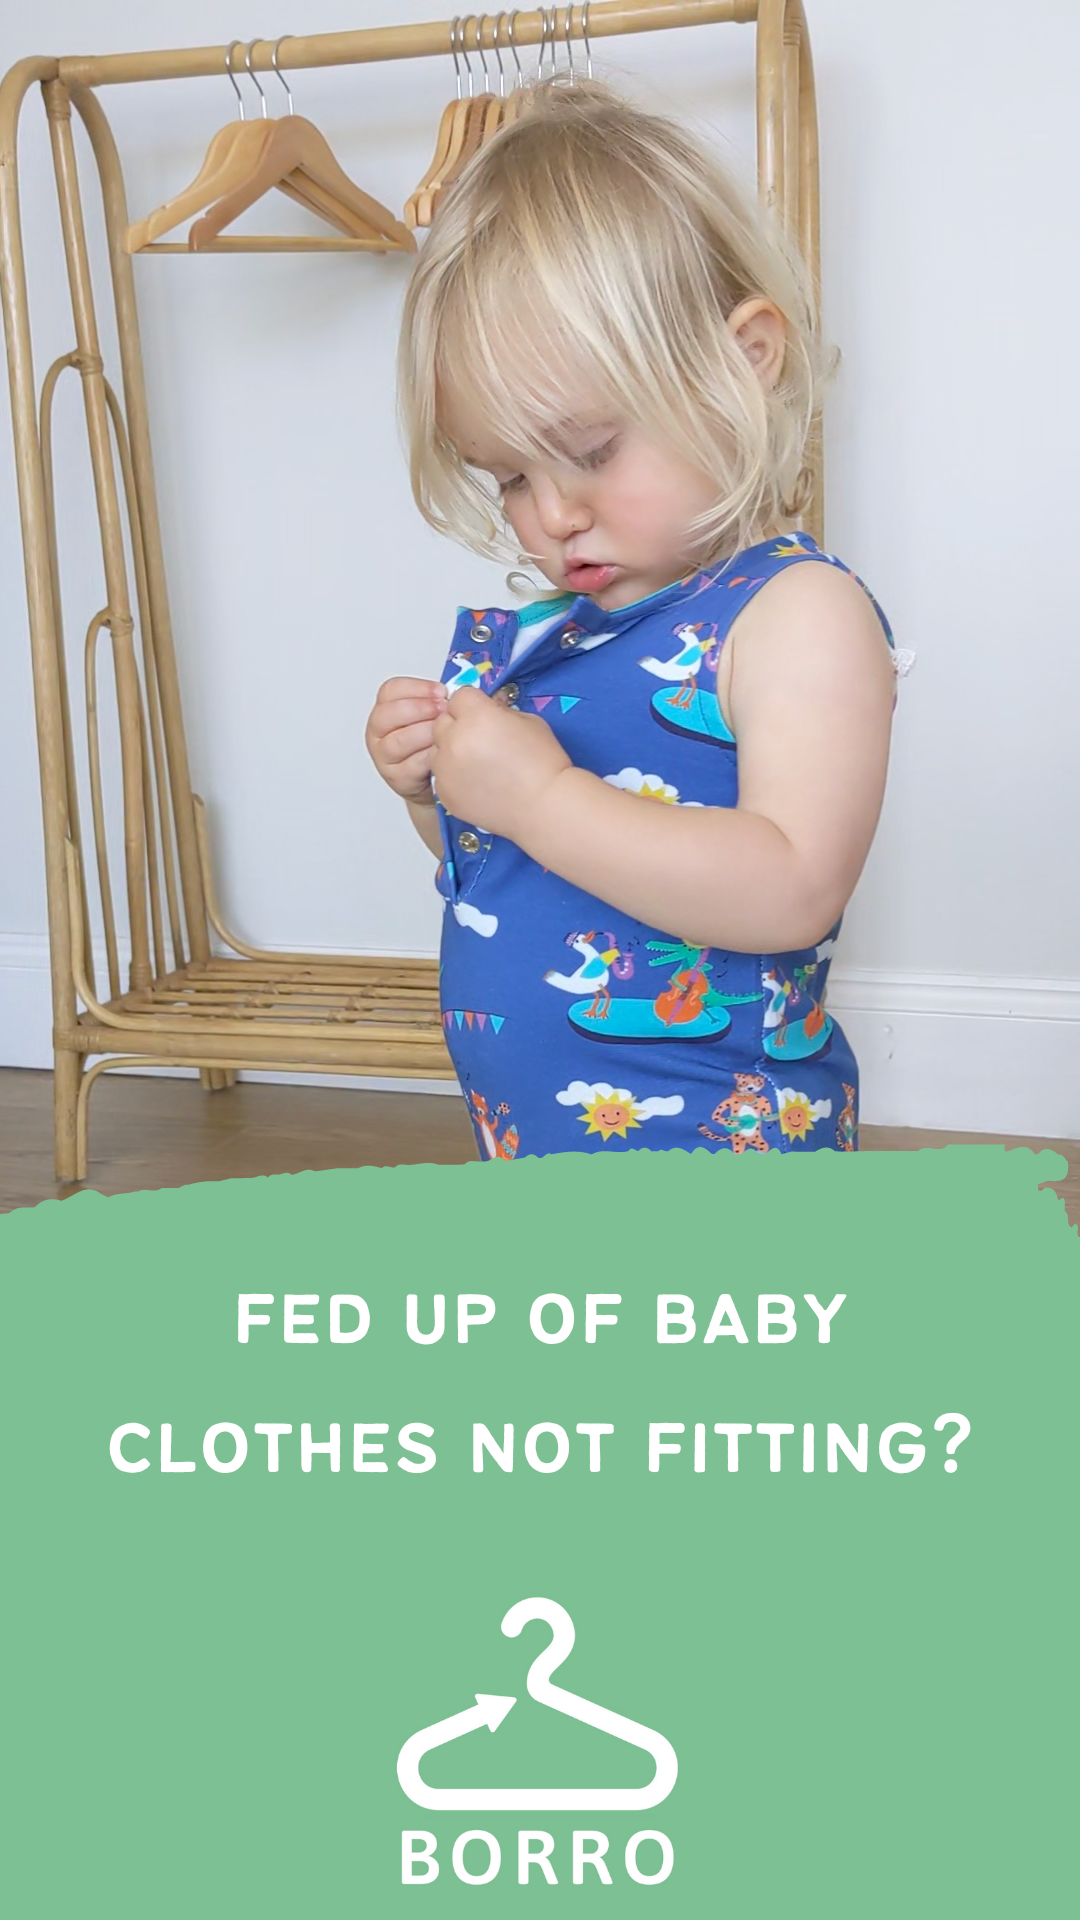 Fed up of baby clothes not fitting?